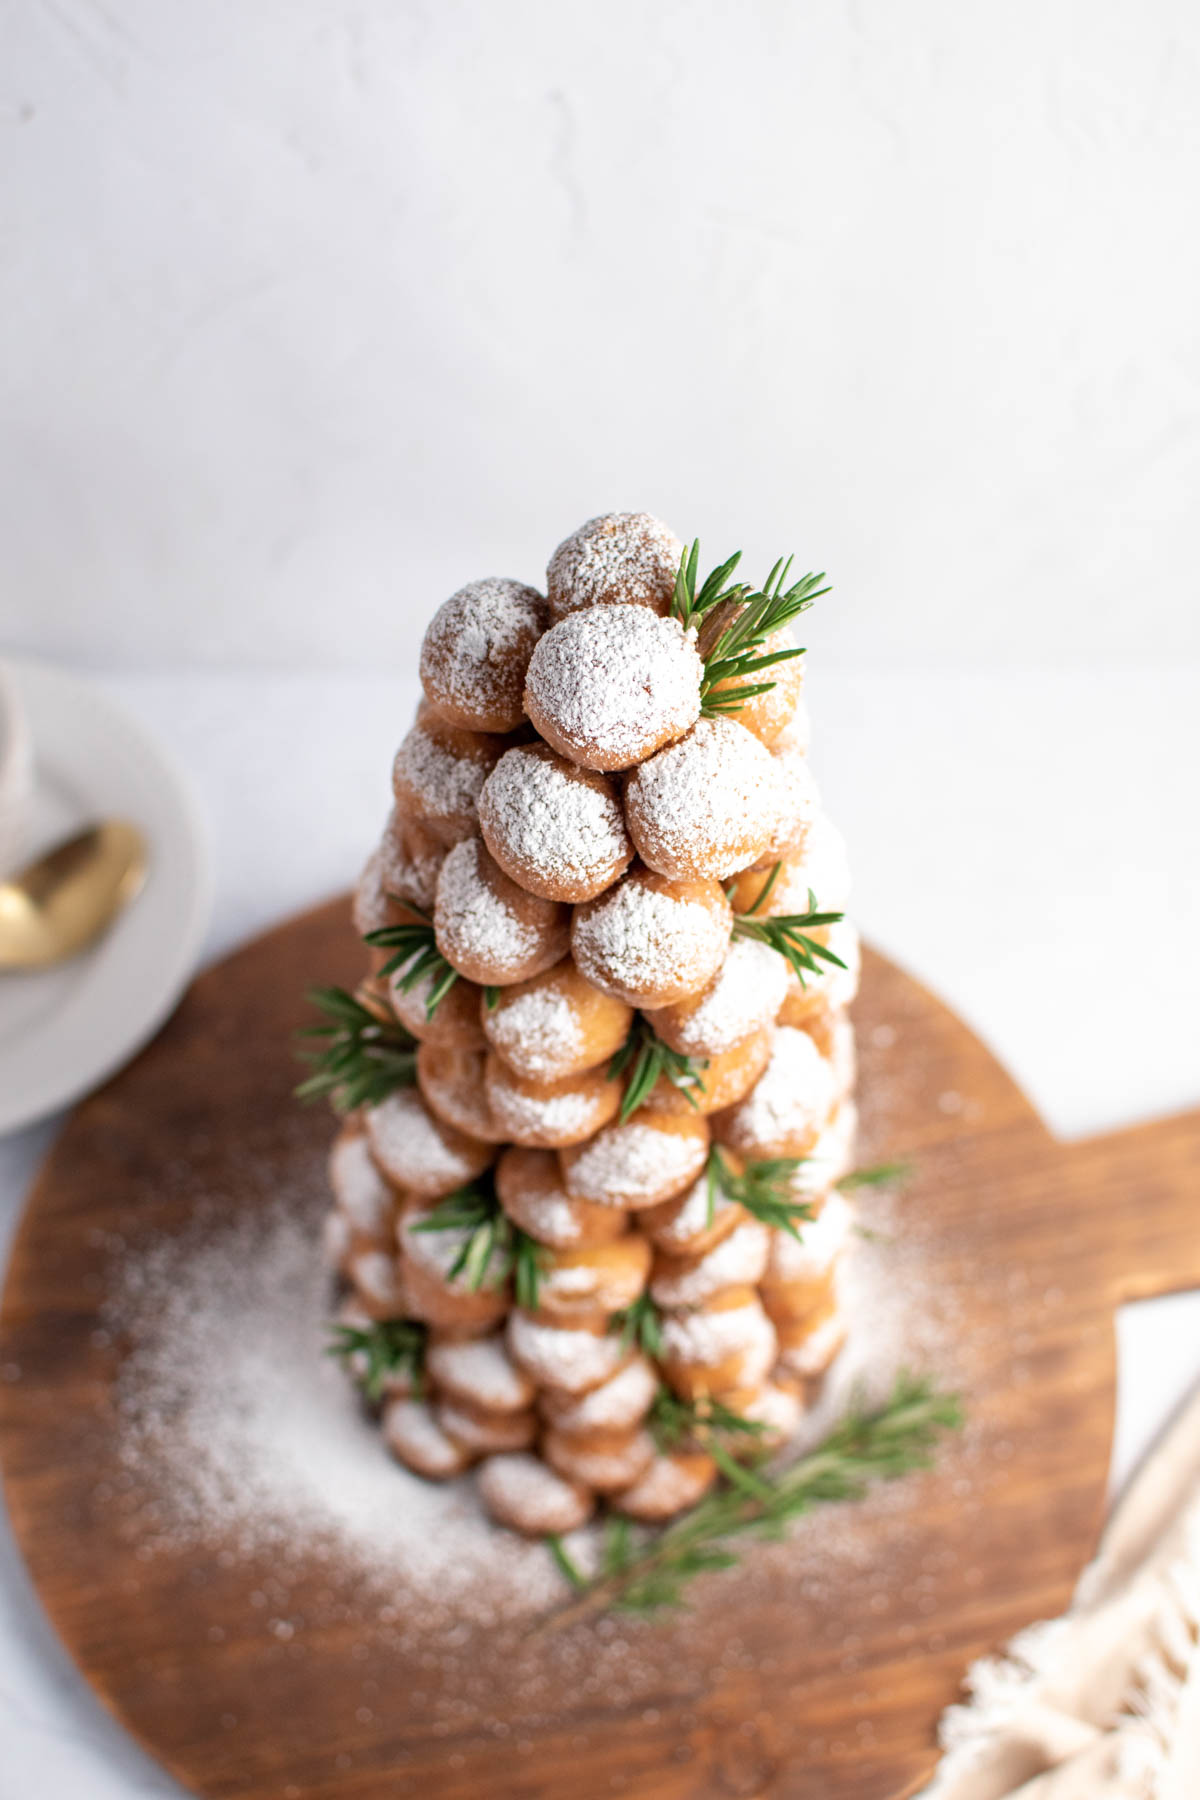 The top of a donut tree made with donut holes, powdered sugar, and fresh rosemary.